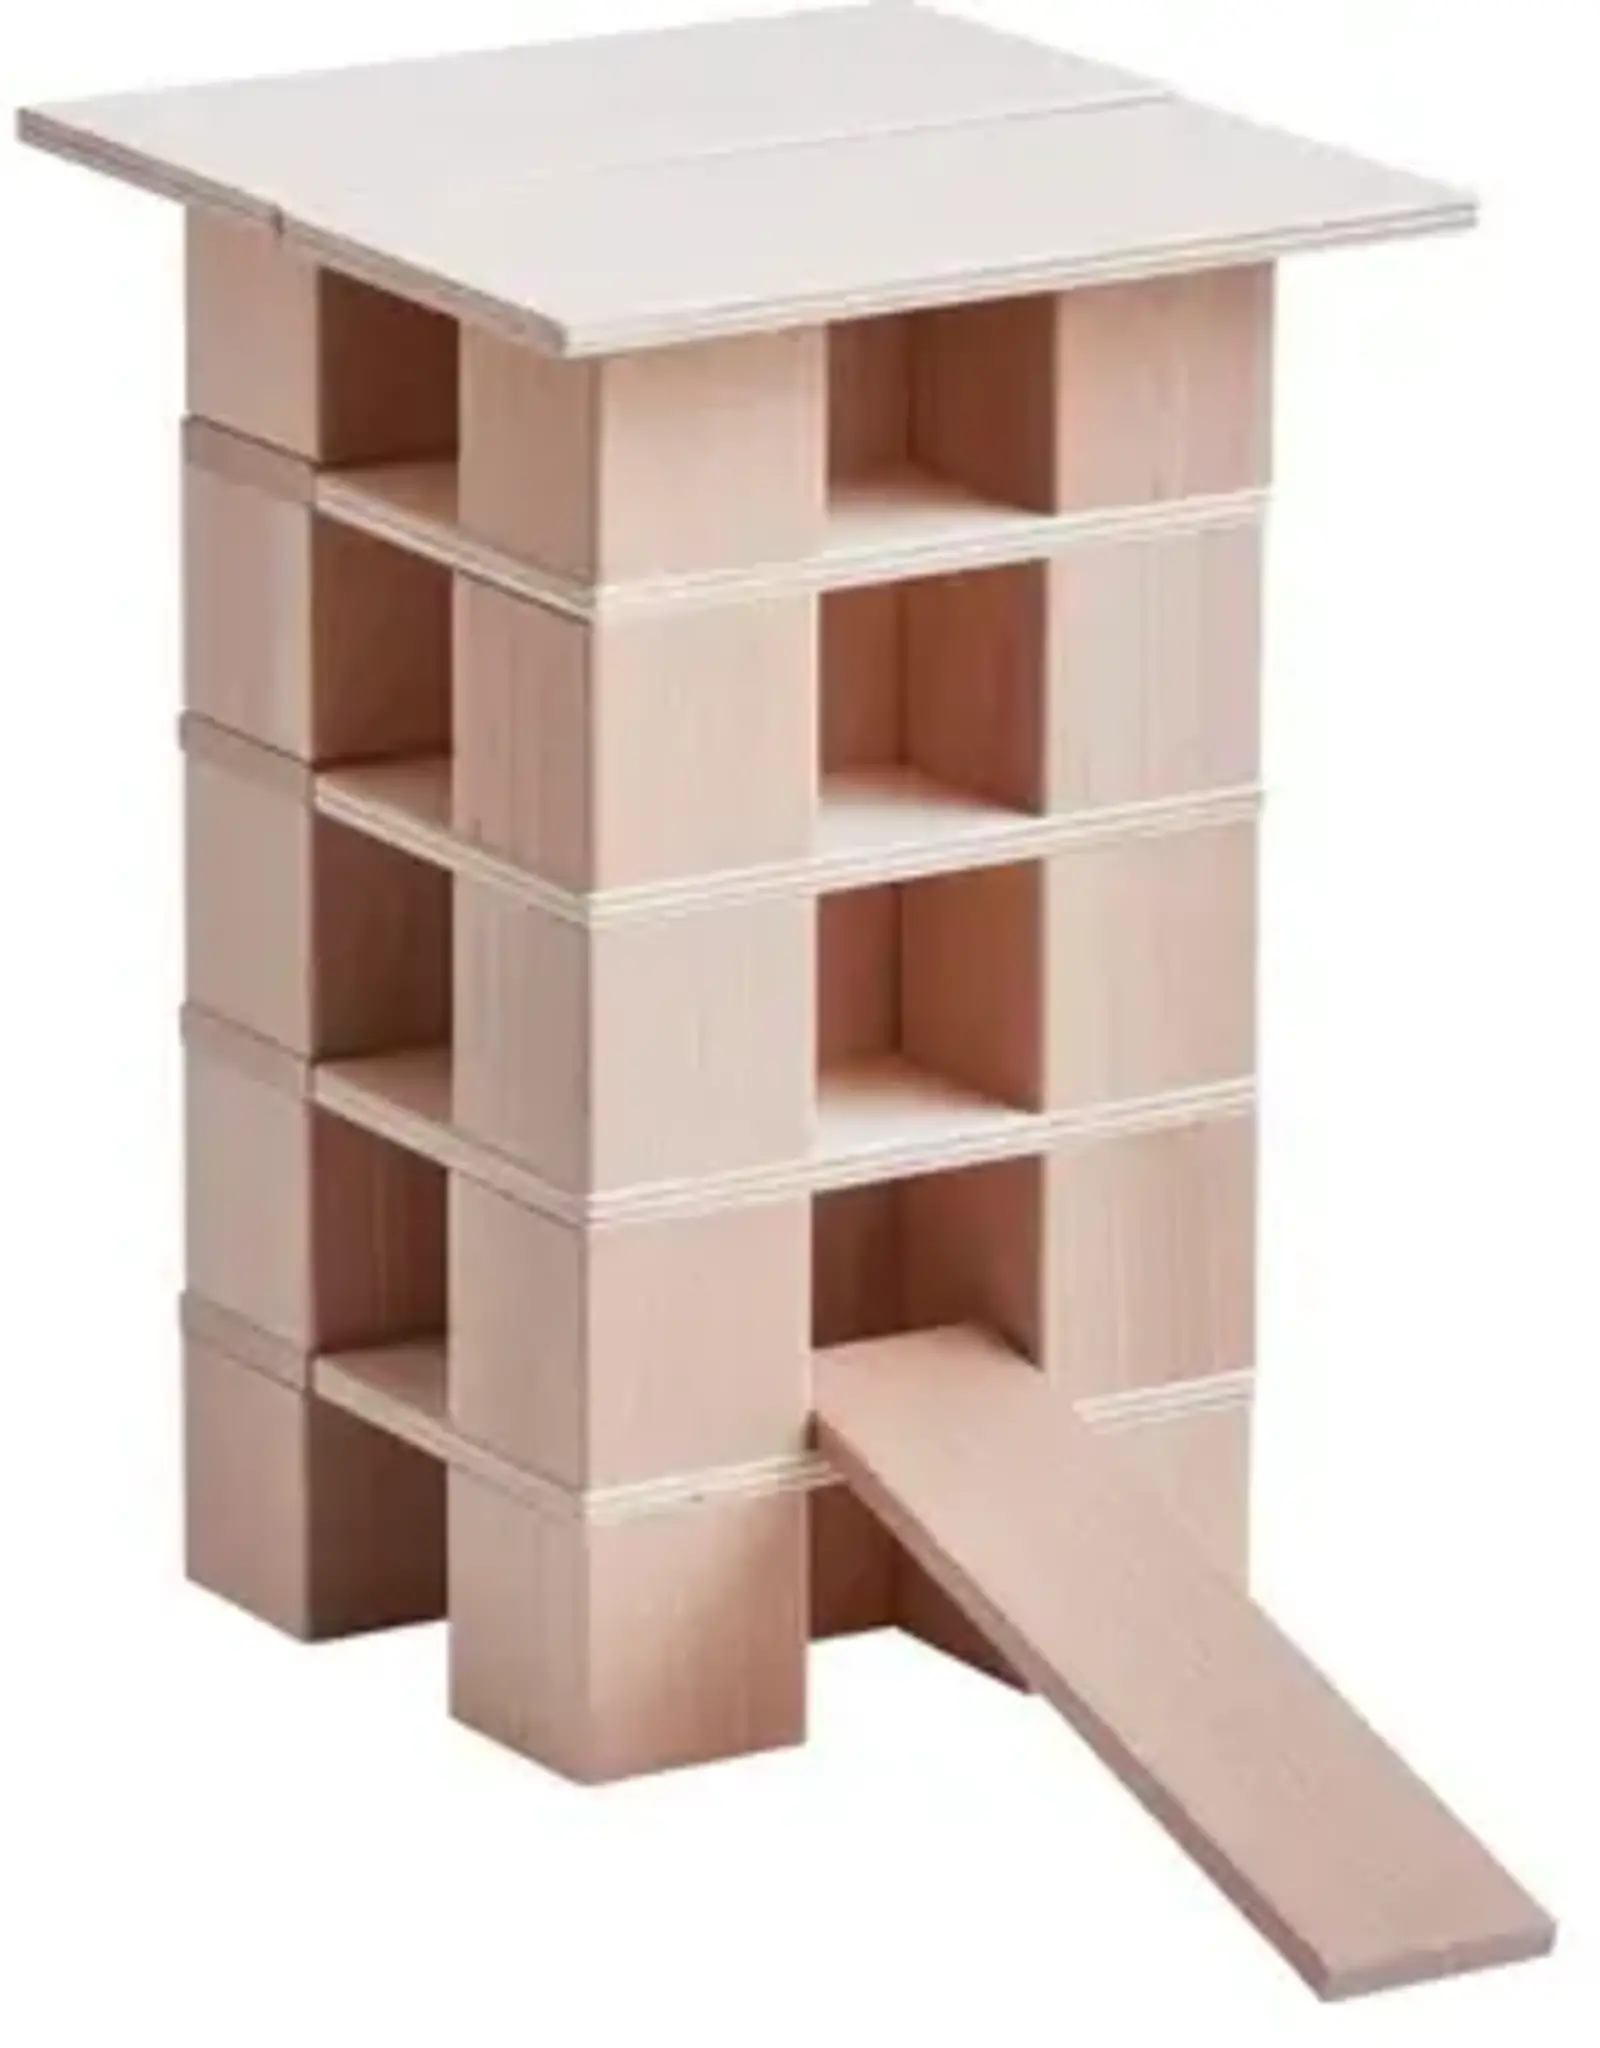 Haba Building Block System Clever-Up! 1.0